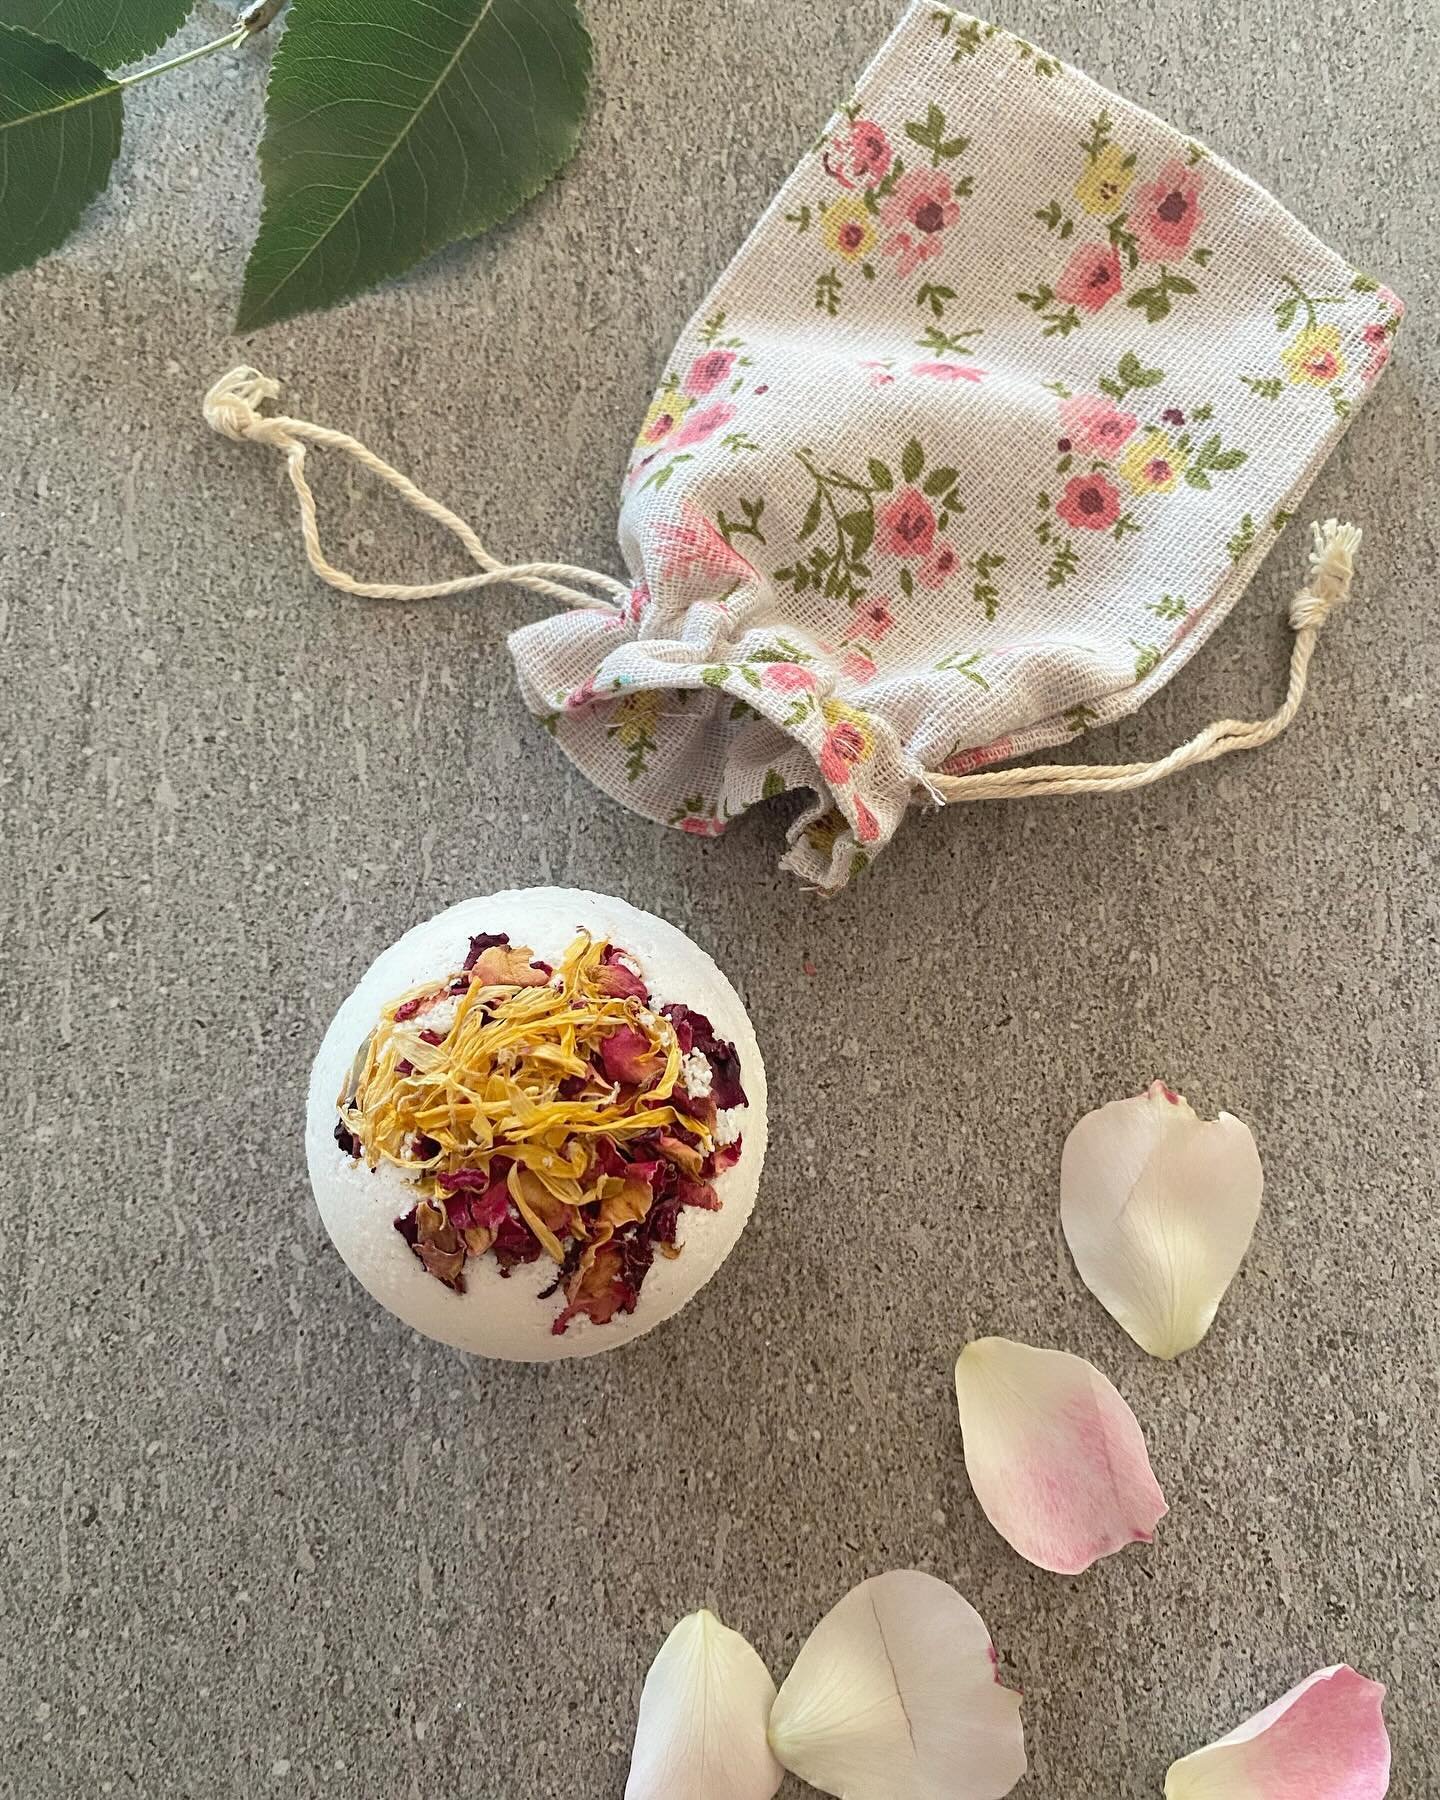 Botanical Roses Natural Bath Bomb

A beautiful floral scent of rose geranium, ylang ylang and sweet orange.
 
💐 100% natural ingredients and essential oils
💐 Vegan, palm oil free, and not tested on animals
💐 No artificial fragrances, dyes, colours